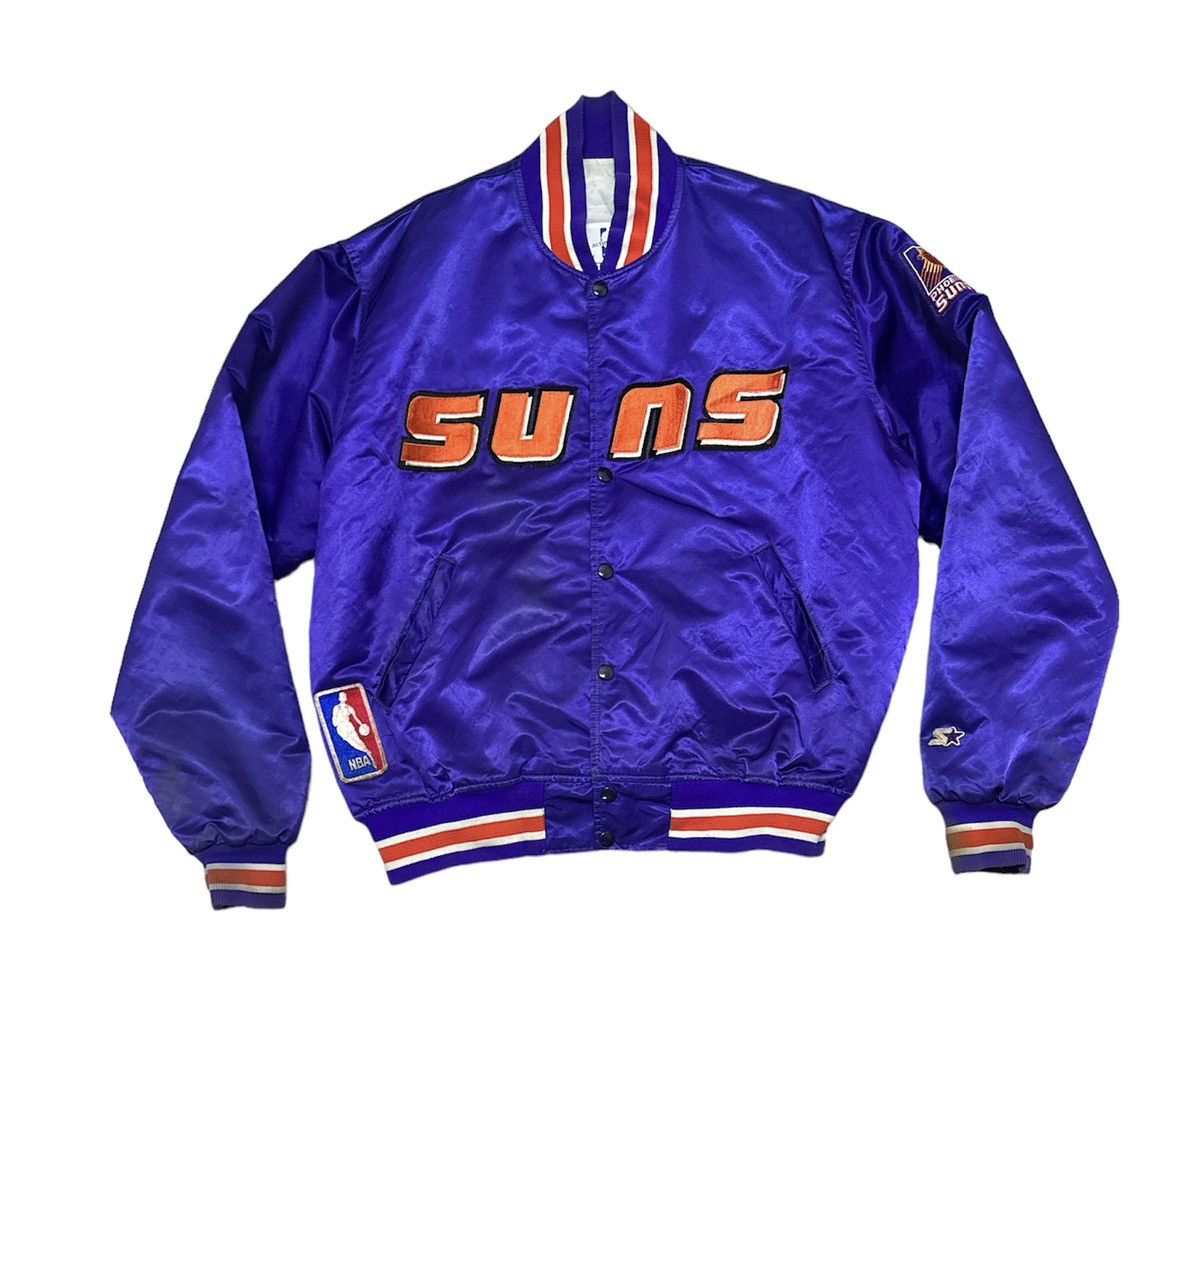 Vintage Vintage 90’s Sun Phoenix NBA Bomber Jacket Style made in USA Size US L / EU 52-54 / 3 - 1 Preview